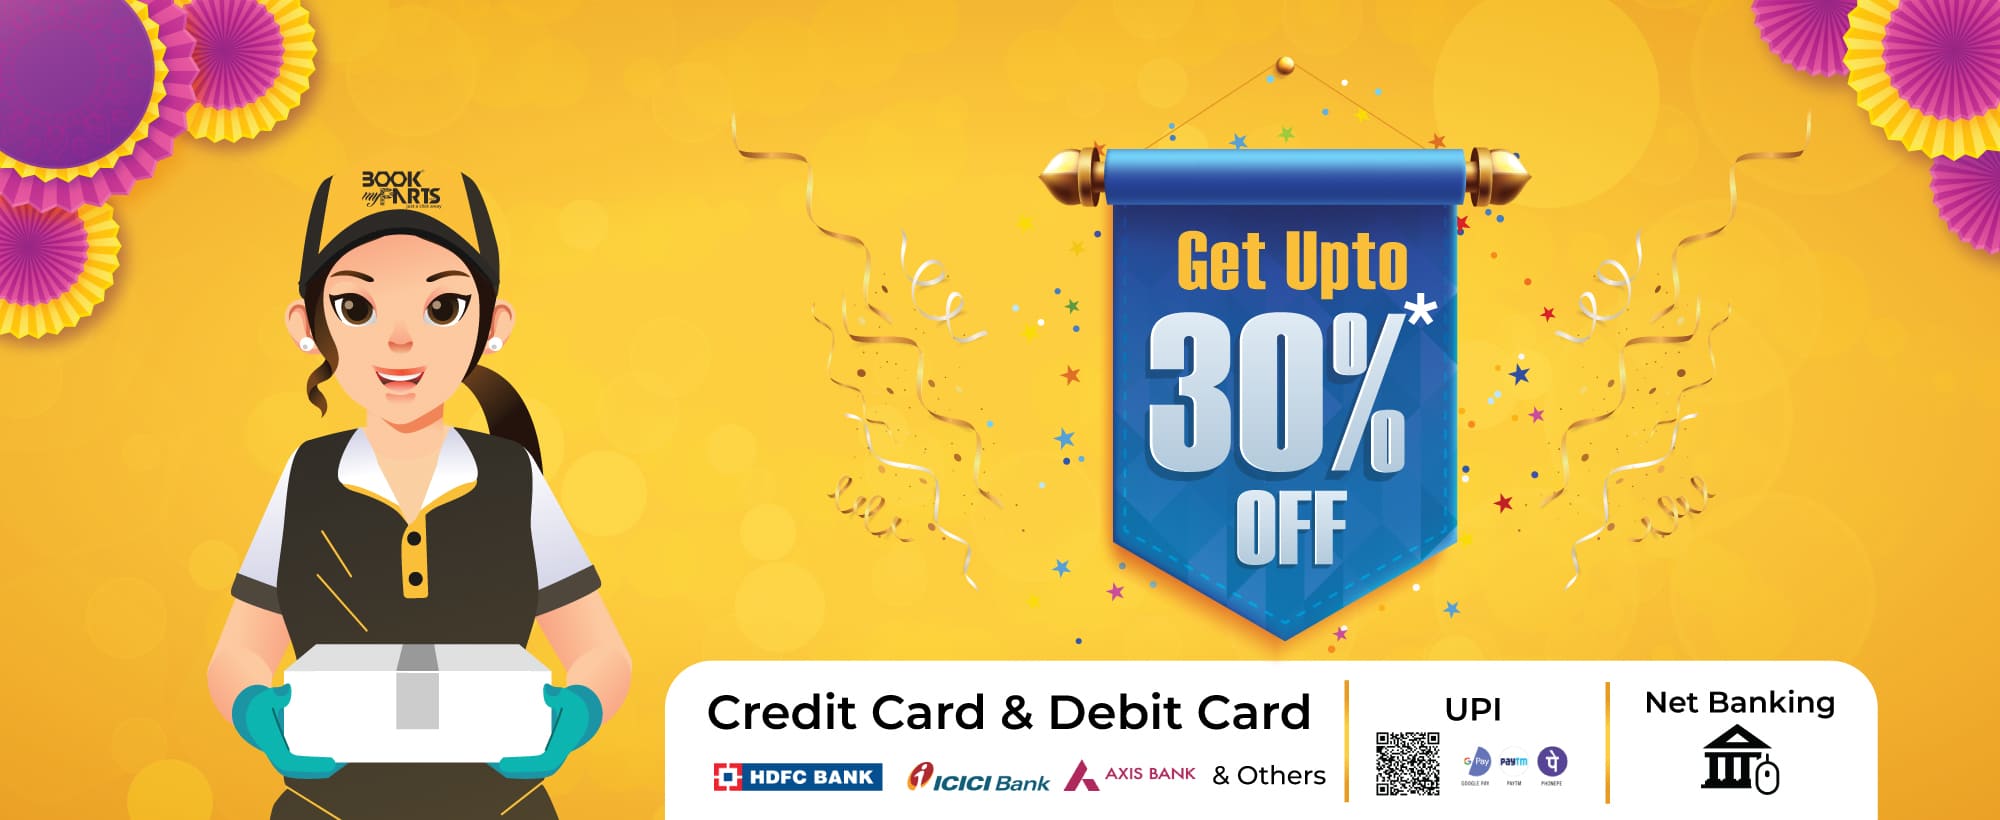 BookMyParts.com-Get upto 30% off, Debit card, Credit card and EMI options available, UPI and Net Banking available